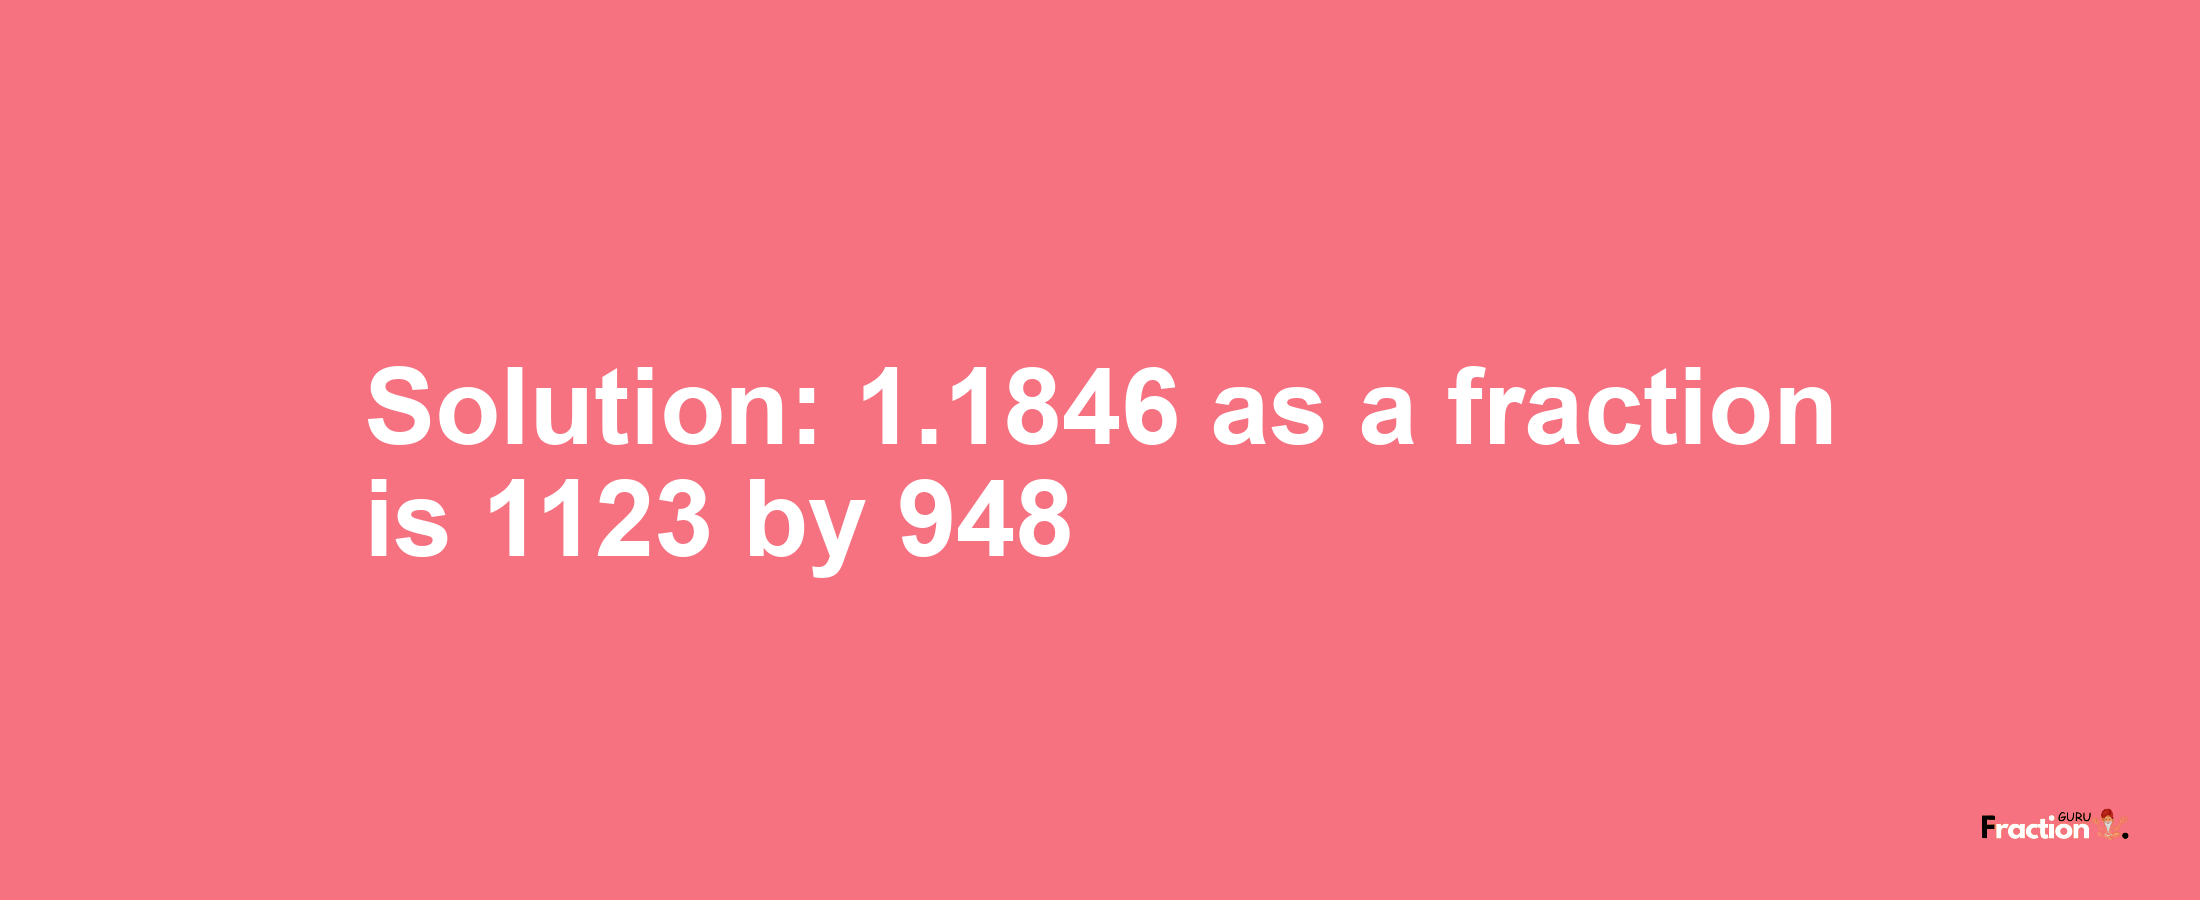 Solution:1.1846 as a fraction is 1123/948